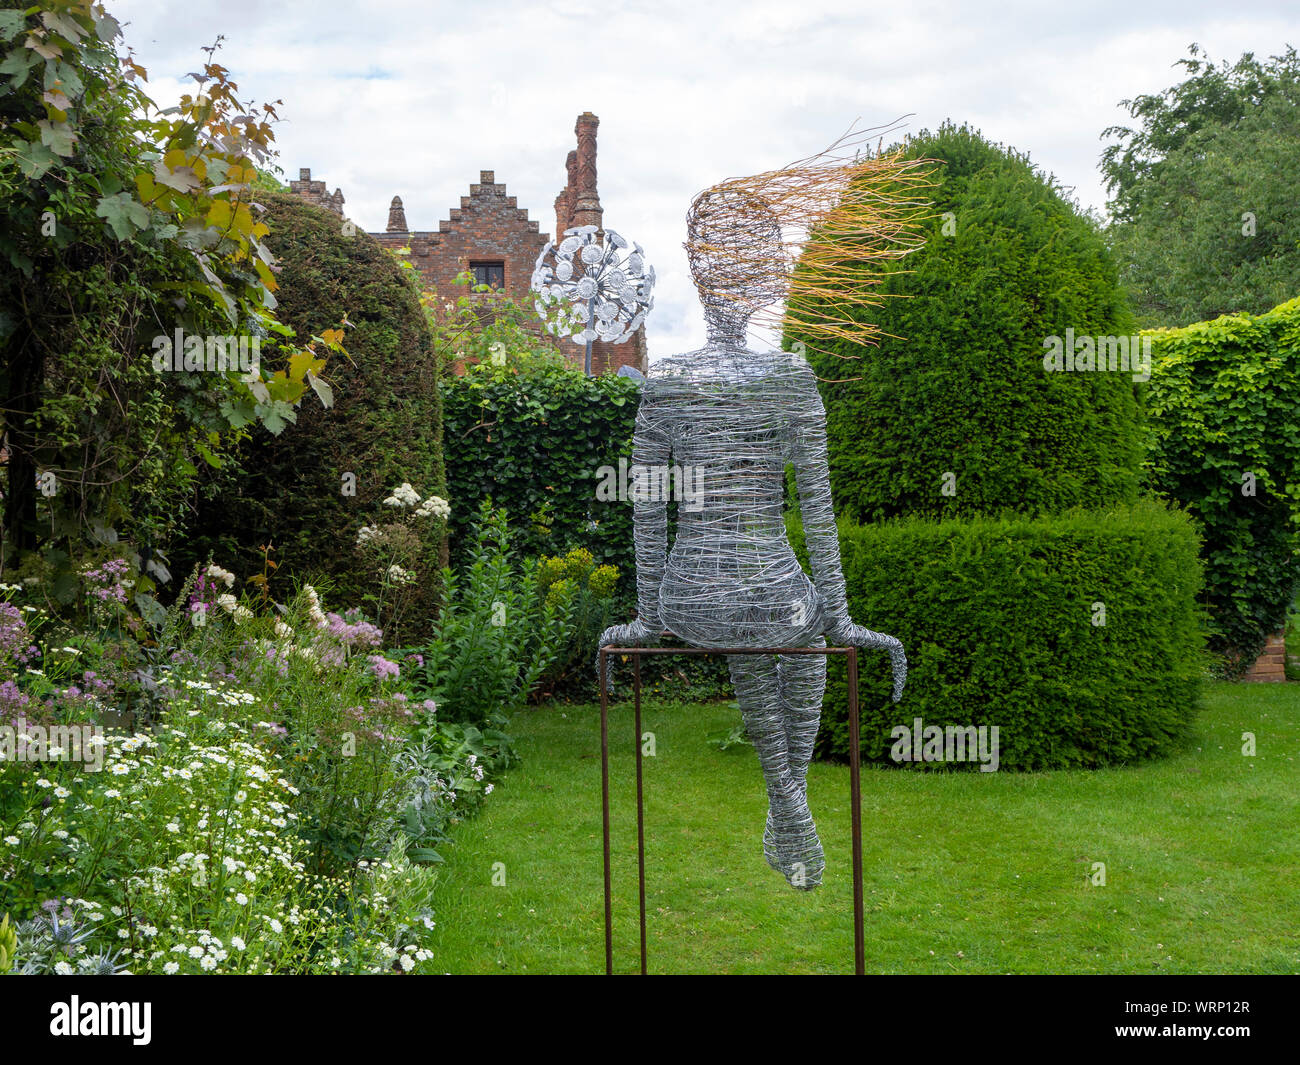 Chenies Manor from the topiary garden. Sculptures by Jenny Pickford, Dandelion, and Rachel Ducker's wirework..marhueri Stock Photo